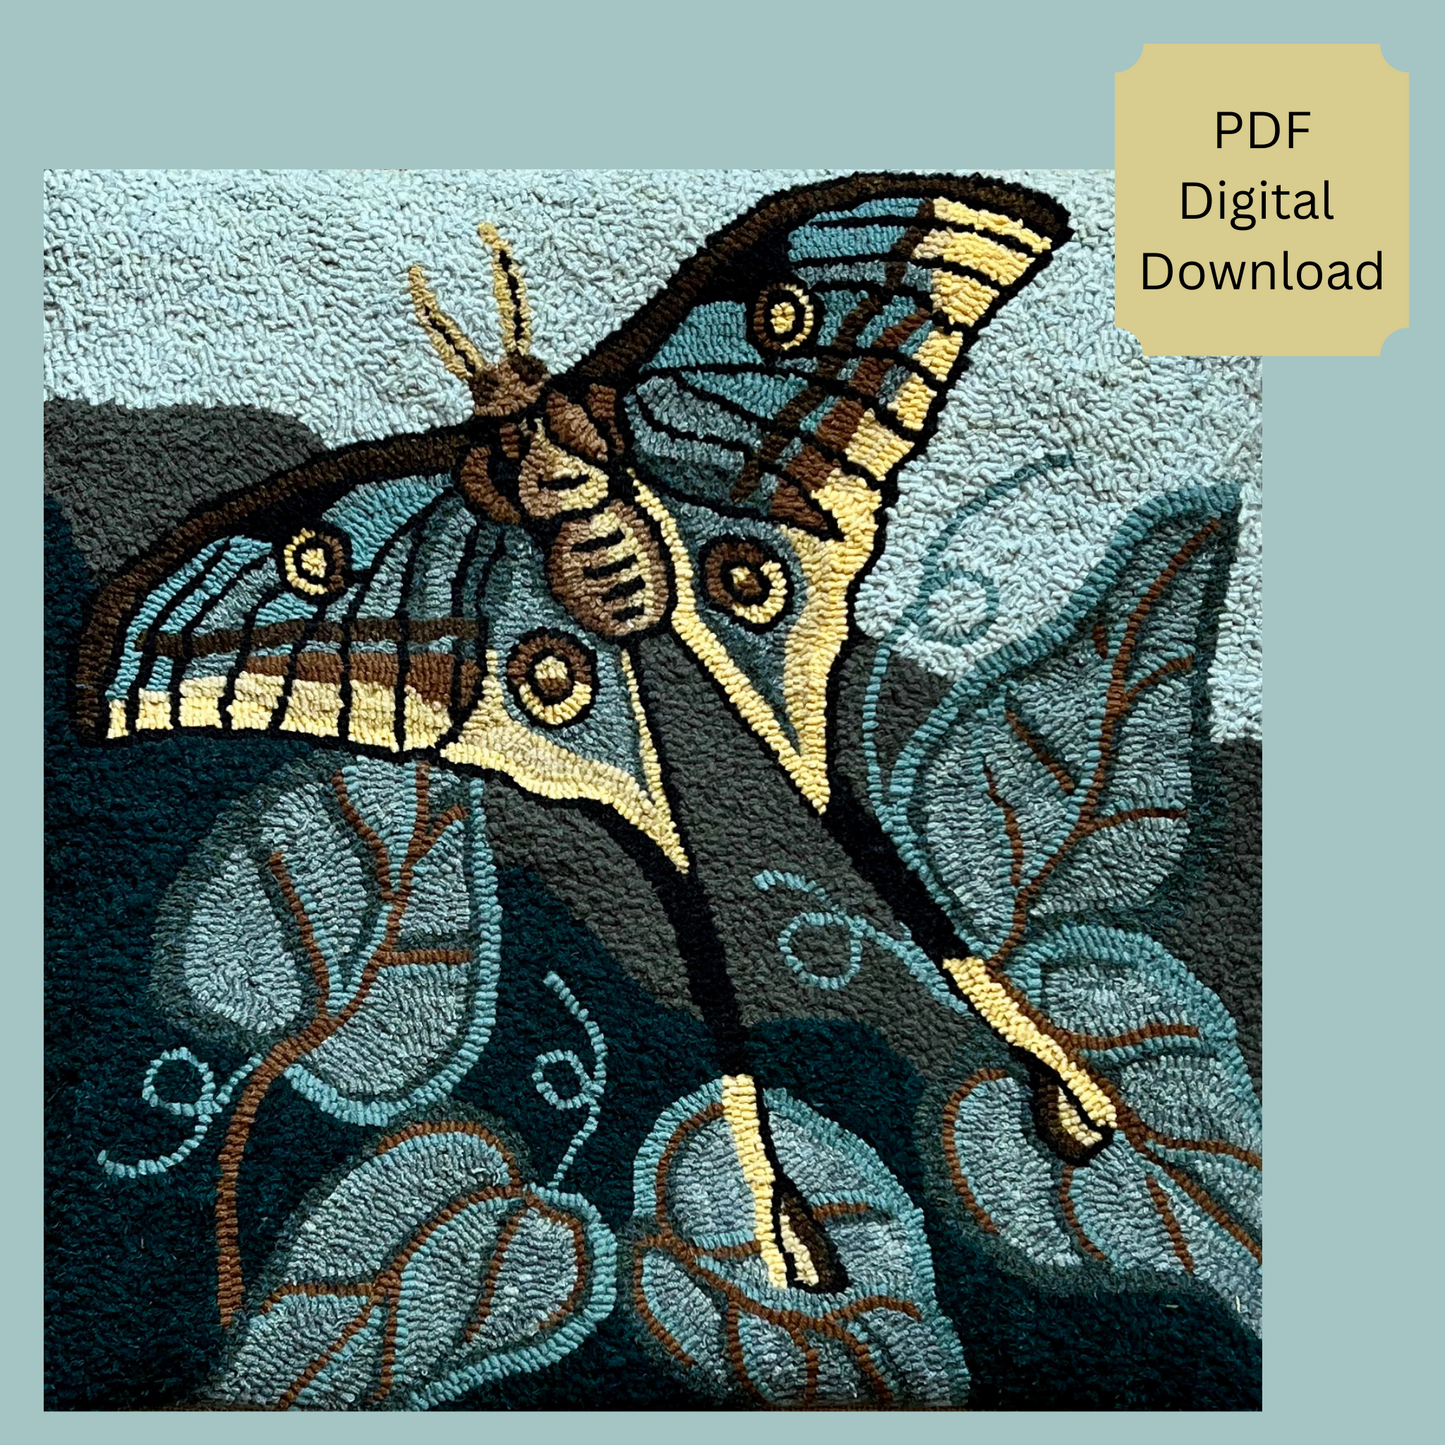 Spanish Moon Moth-PDF Digital Download Rug Hooking Pattern by Orphaned Wool, Copyright 2024 Kelly Kanyok. Enjoy creating this wonderful Spanish Moon Moth pattern designed for enlargement. Create the perfect size design for your home.